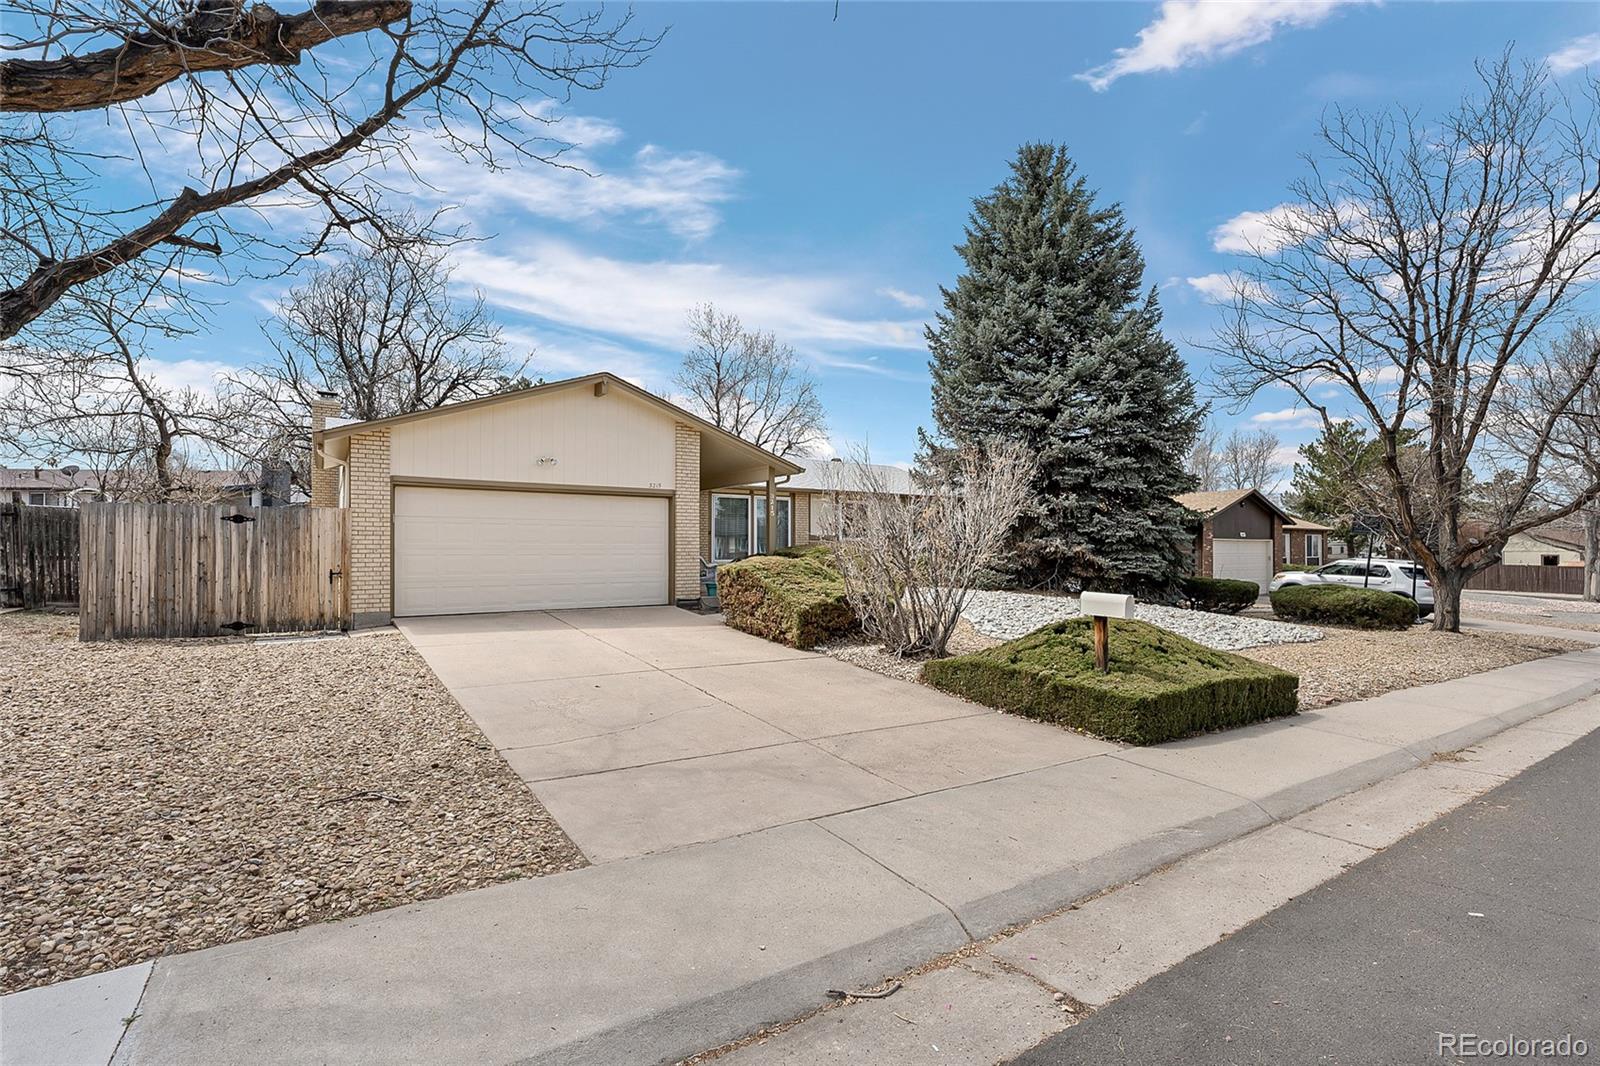 3215 s nucla street, aurora sold home. Closed on 2024-05-20 for $515,000.